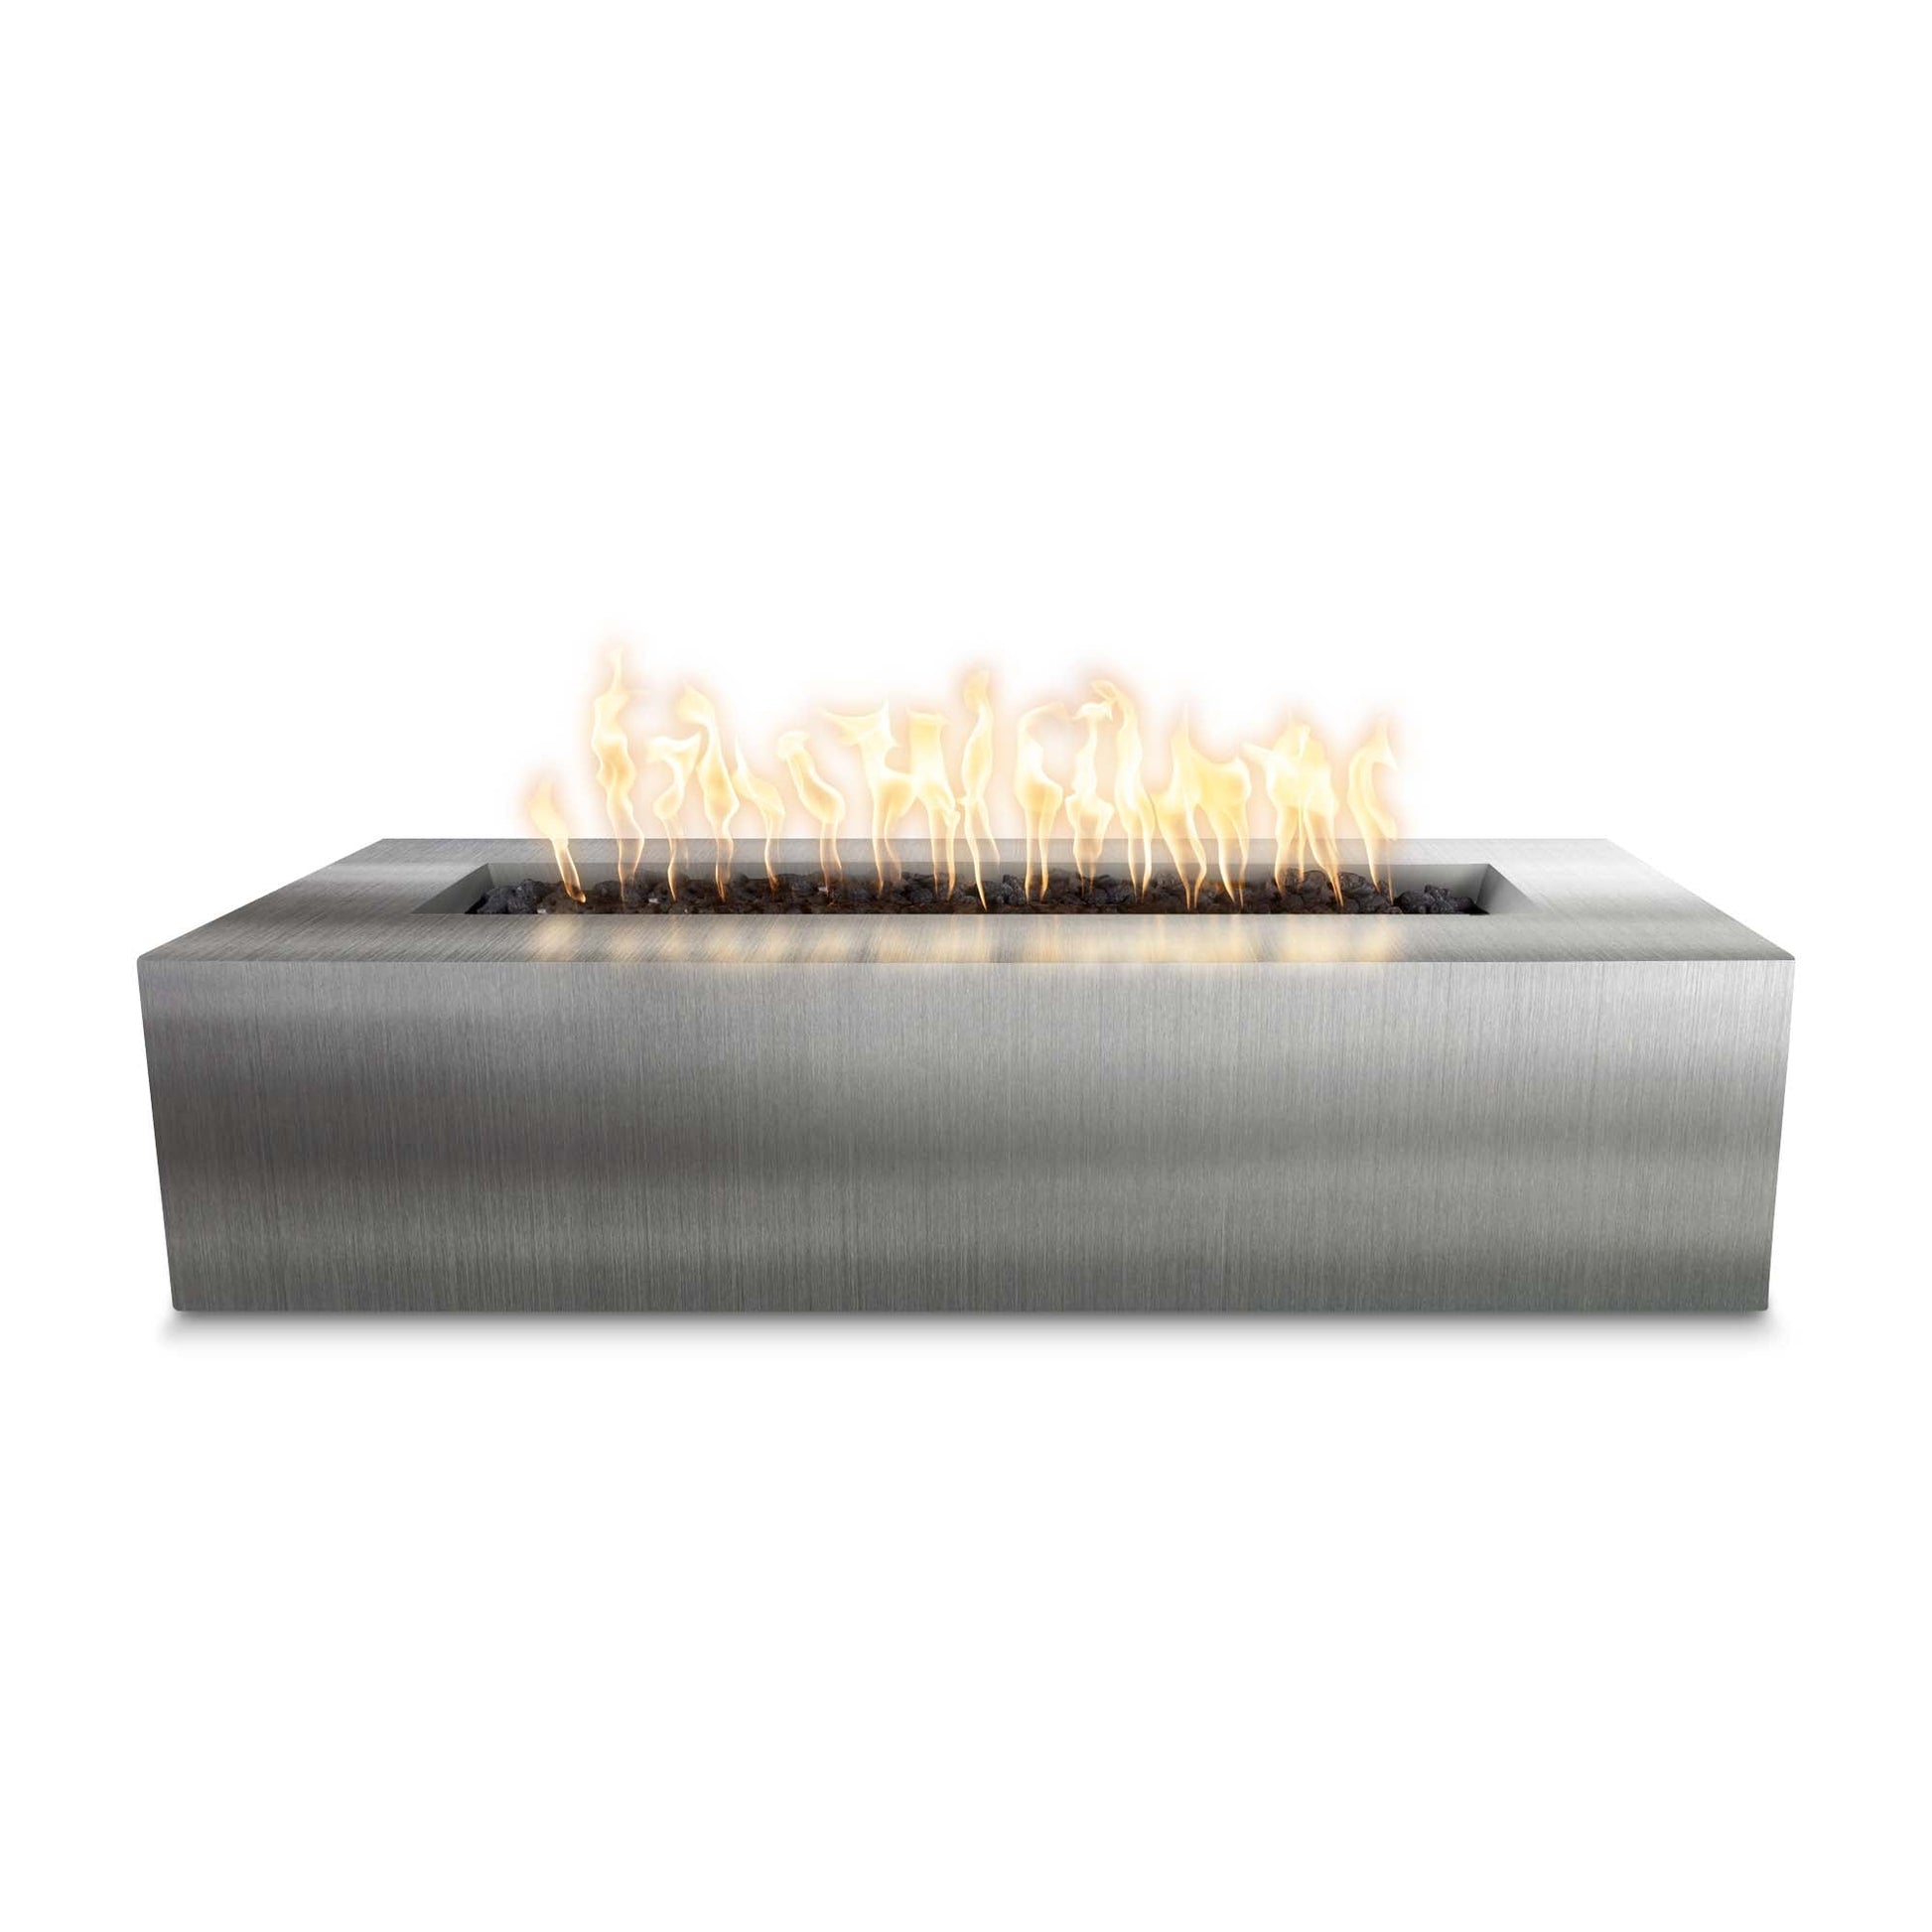 The Outdoor Plus Rectangular Regal 54" Stainless Steel Liquid Propane Fire Pit with Flame Sense with Spark Ignition